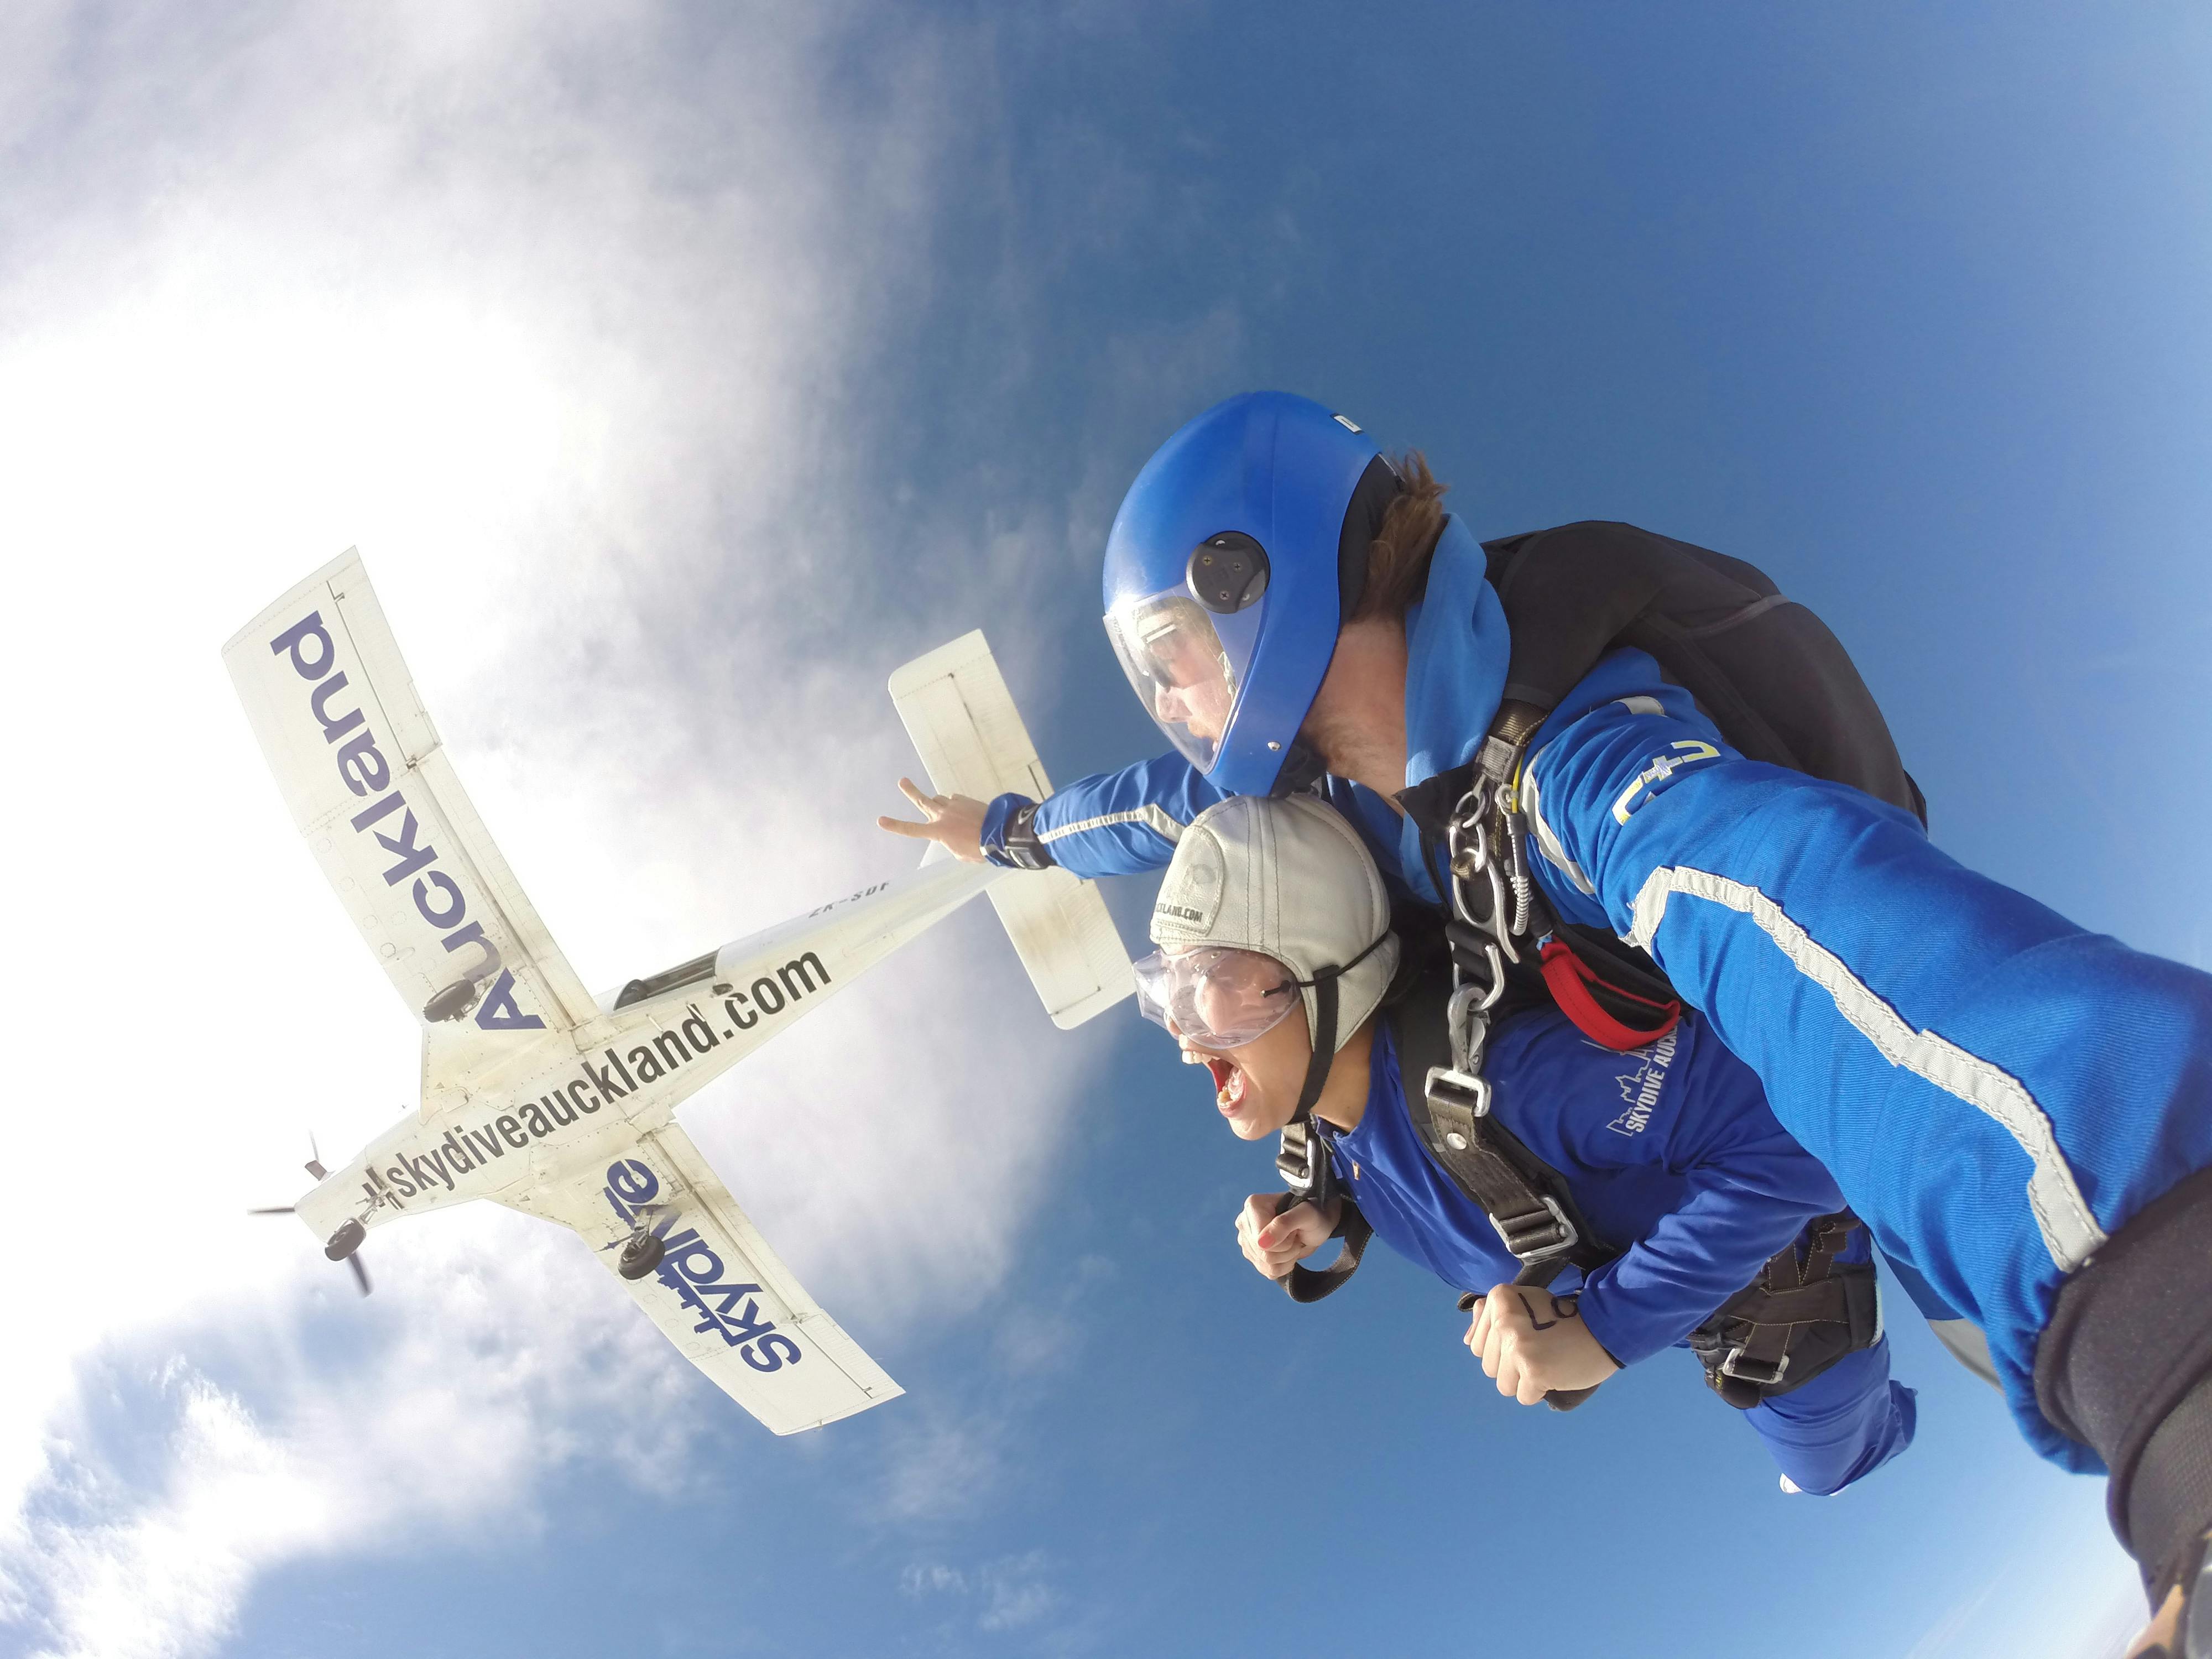 13,000ft skydiving experience in Auckland